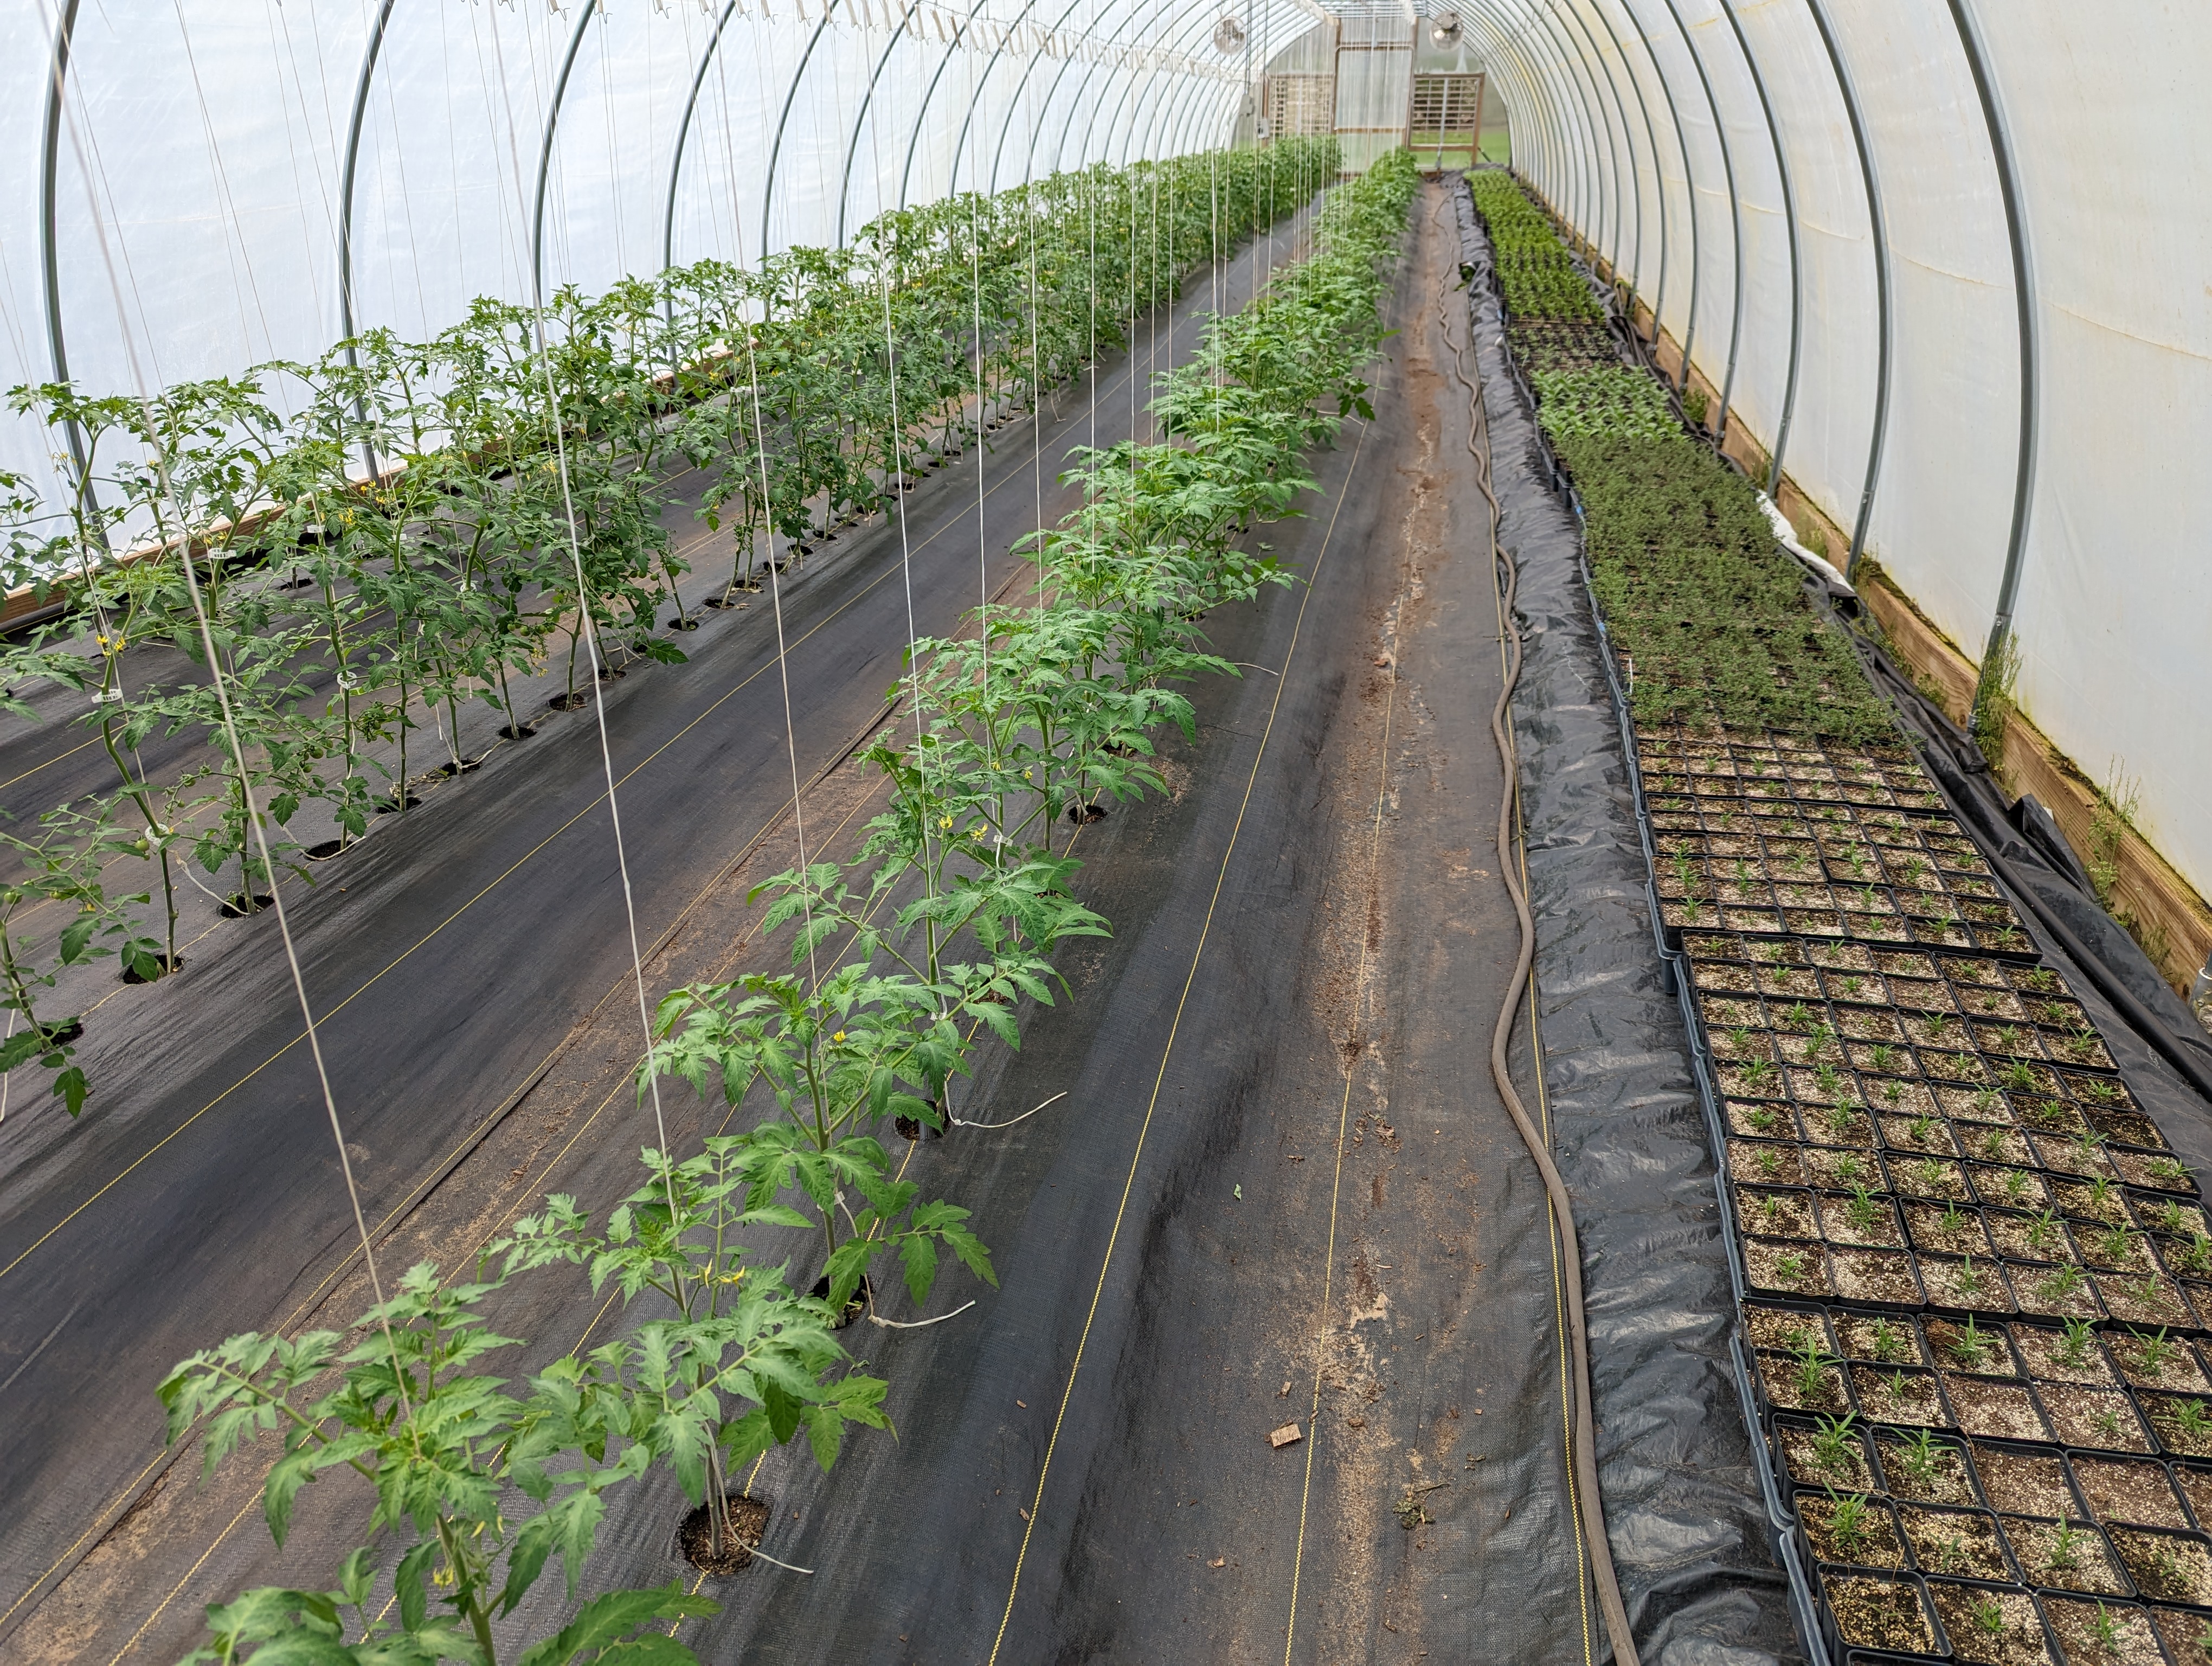 Tomato plantings in a hoophouse.